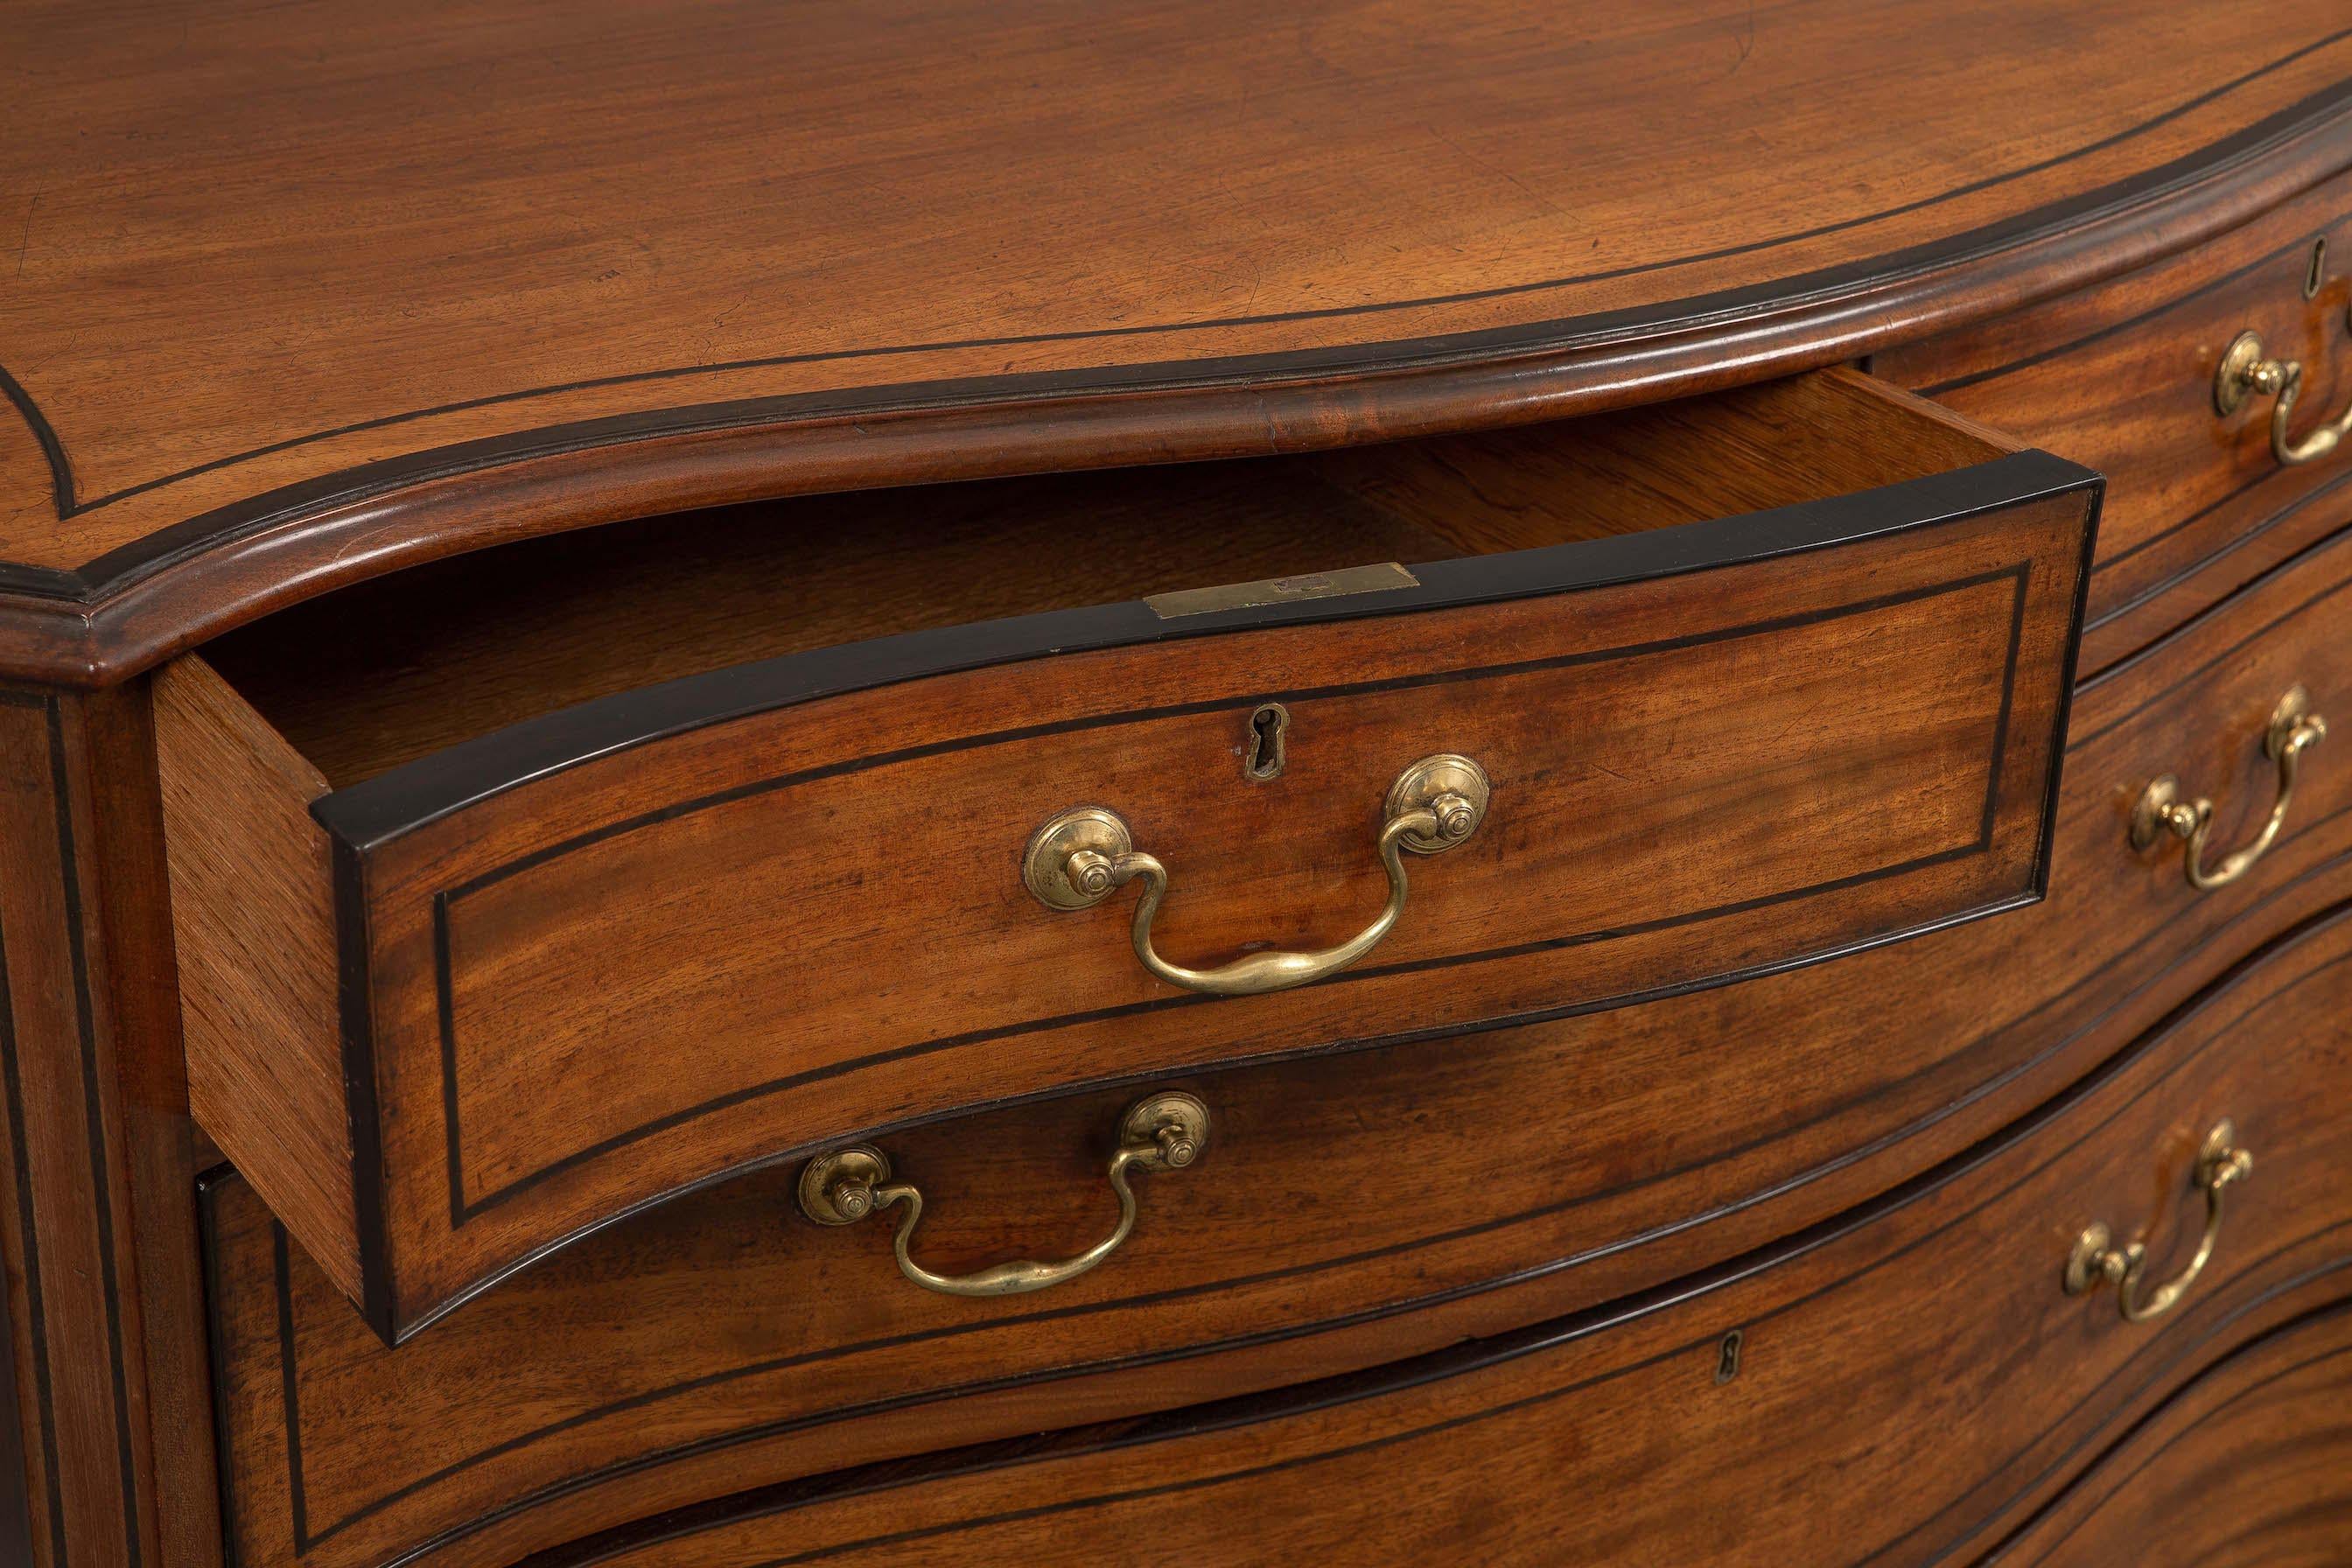 Late 18th Century George III Period Serpentine-Fronted Chest of Drawers in the Manner of Thomas For Sale